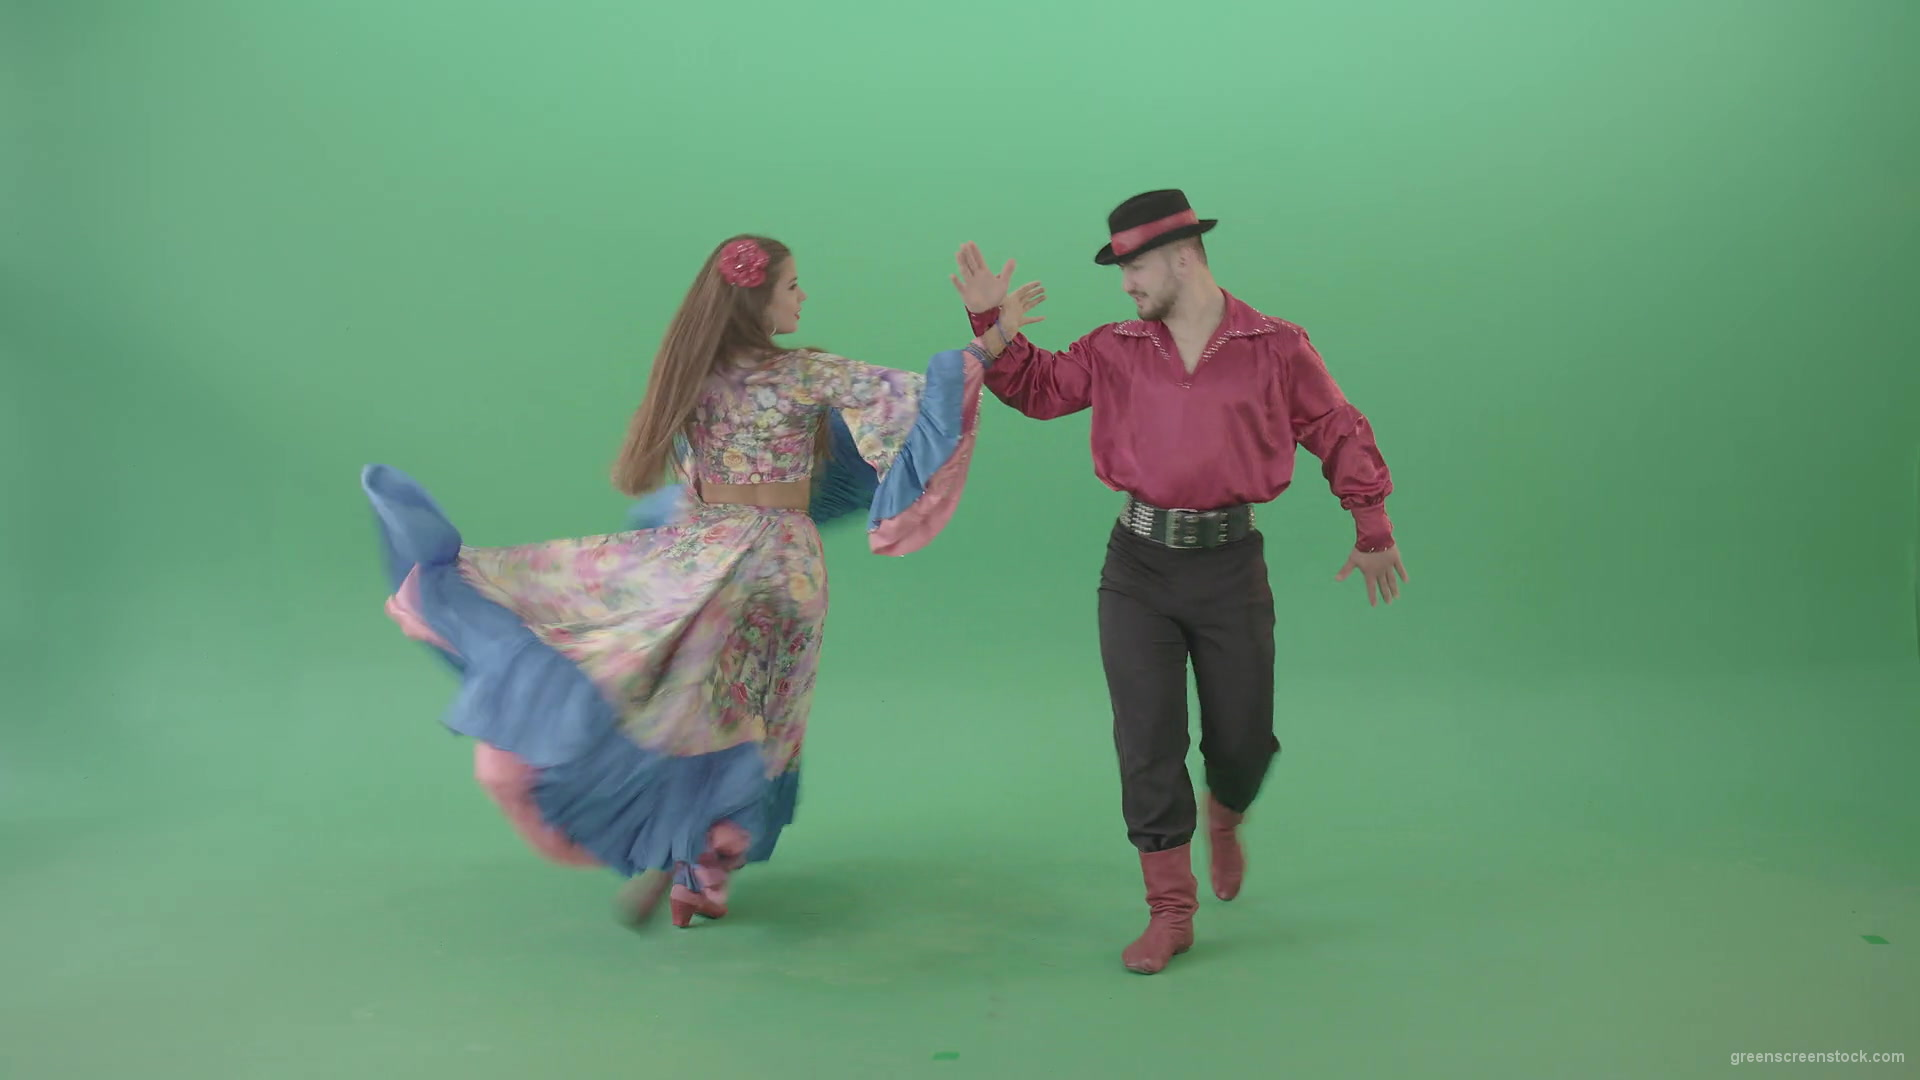 Folk-national-romania-dance-by-gypsy-tzigane-couple-isolated-on-green-screen-4K-video-footage-1920_004 Green Screen Stock